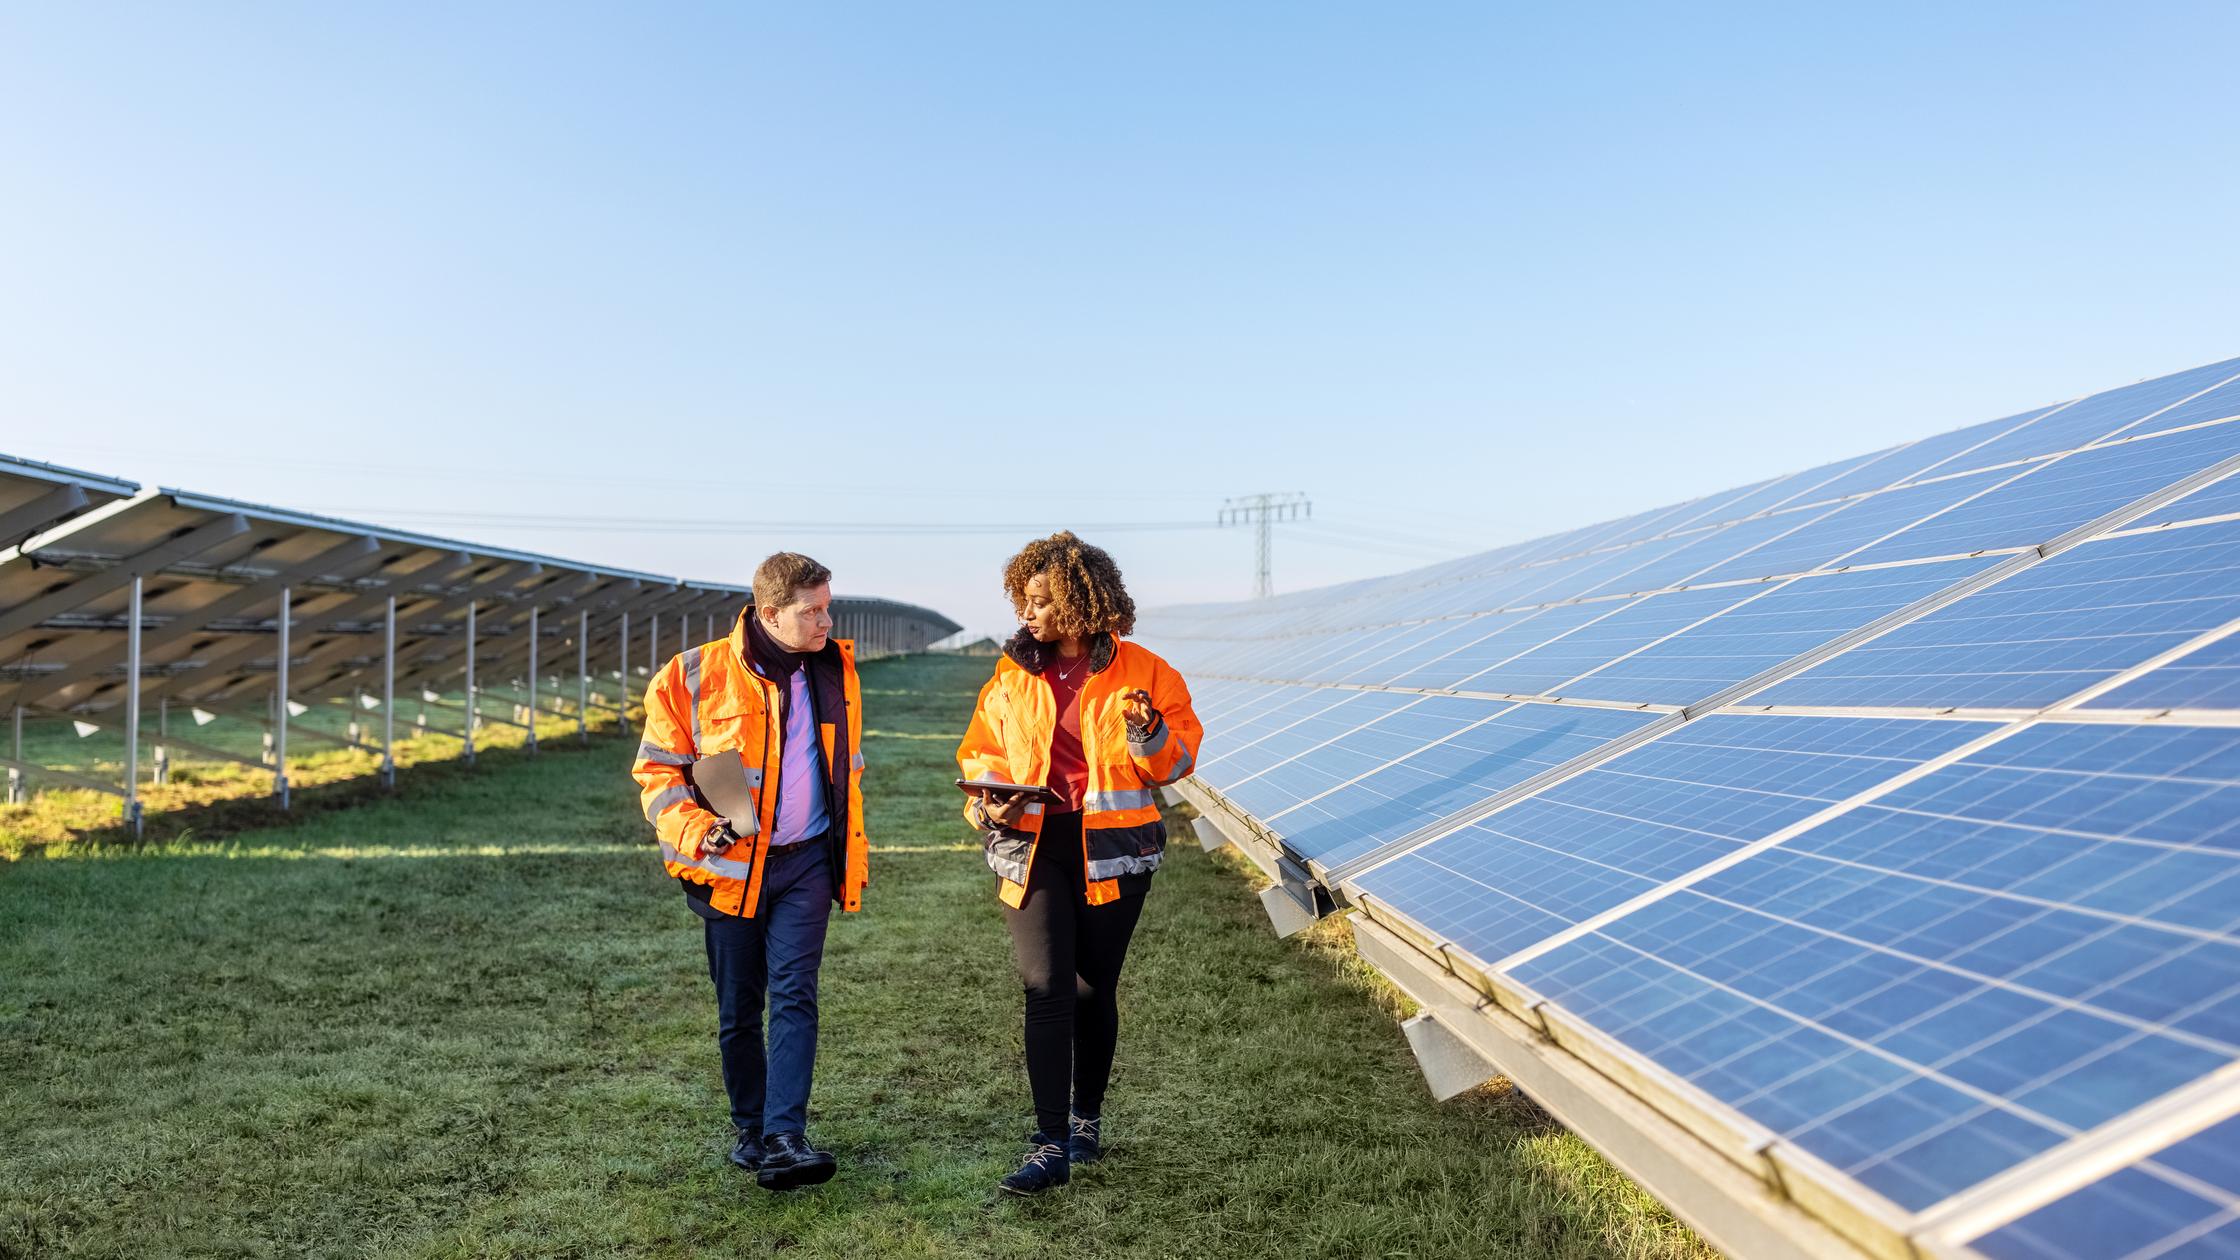 Two technicians in reflective clothing walking between rows of photovoltaic panels at solar farm.